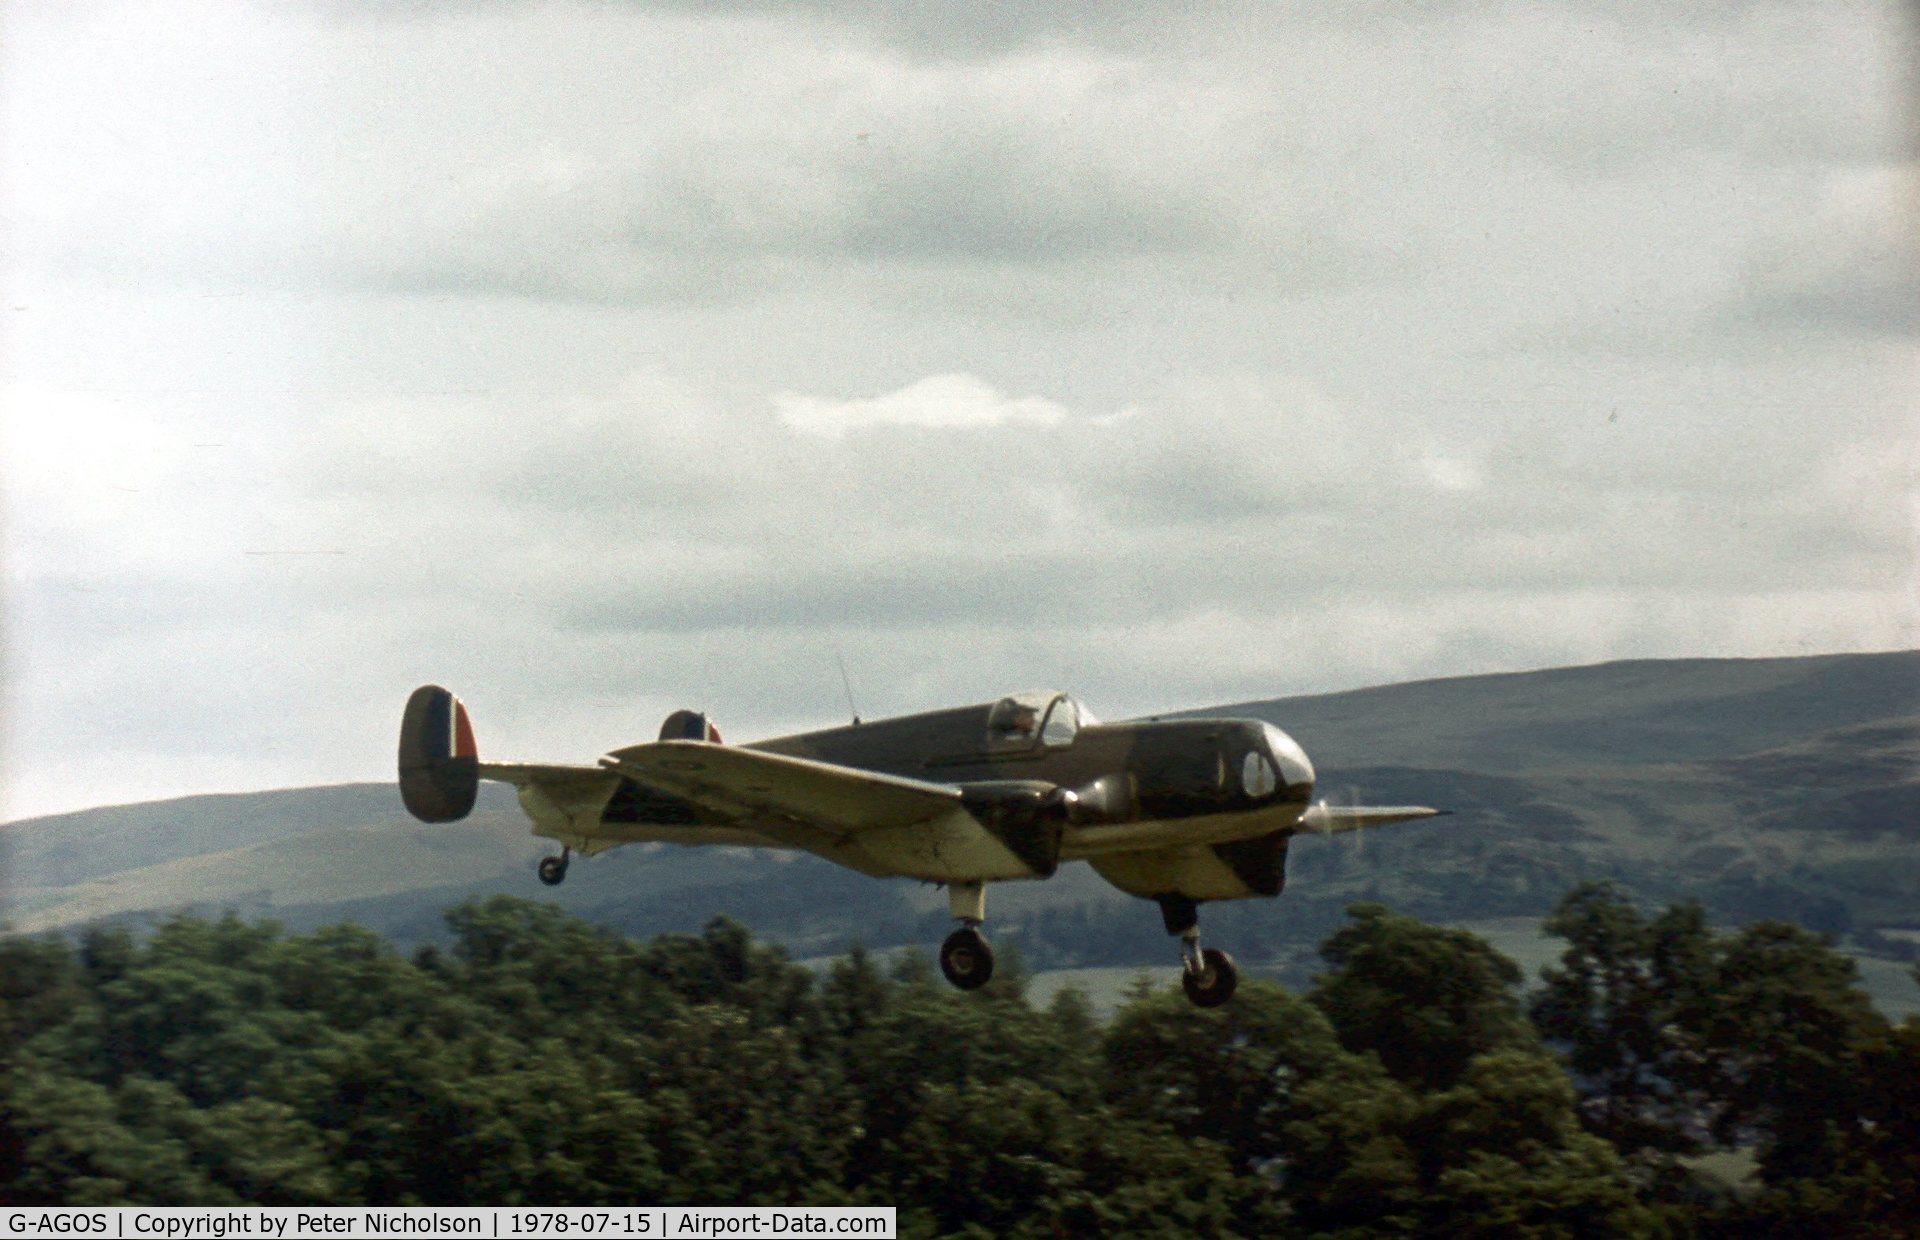 G-AGOS, Reid And Sigrist Ltd RS.4 Desford Trainer C/N 03, Coming in to land at the 1978 Strathallan Open Day.